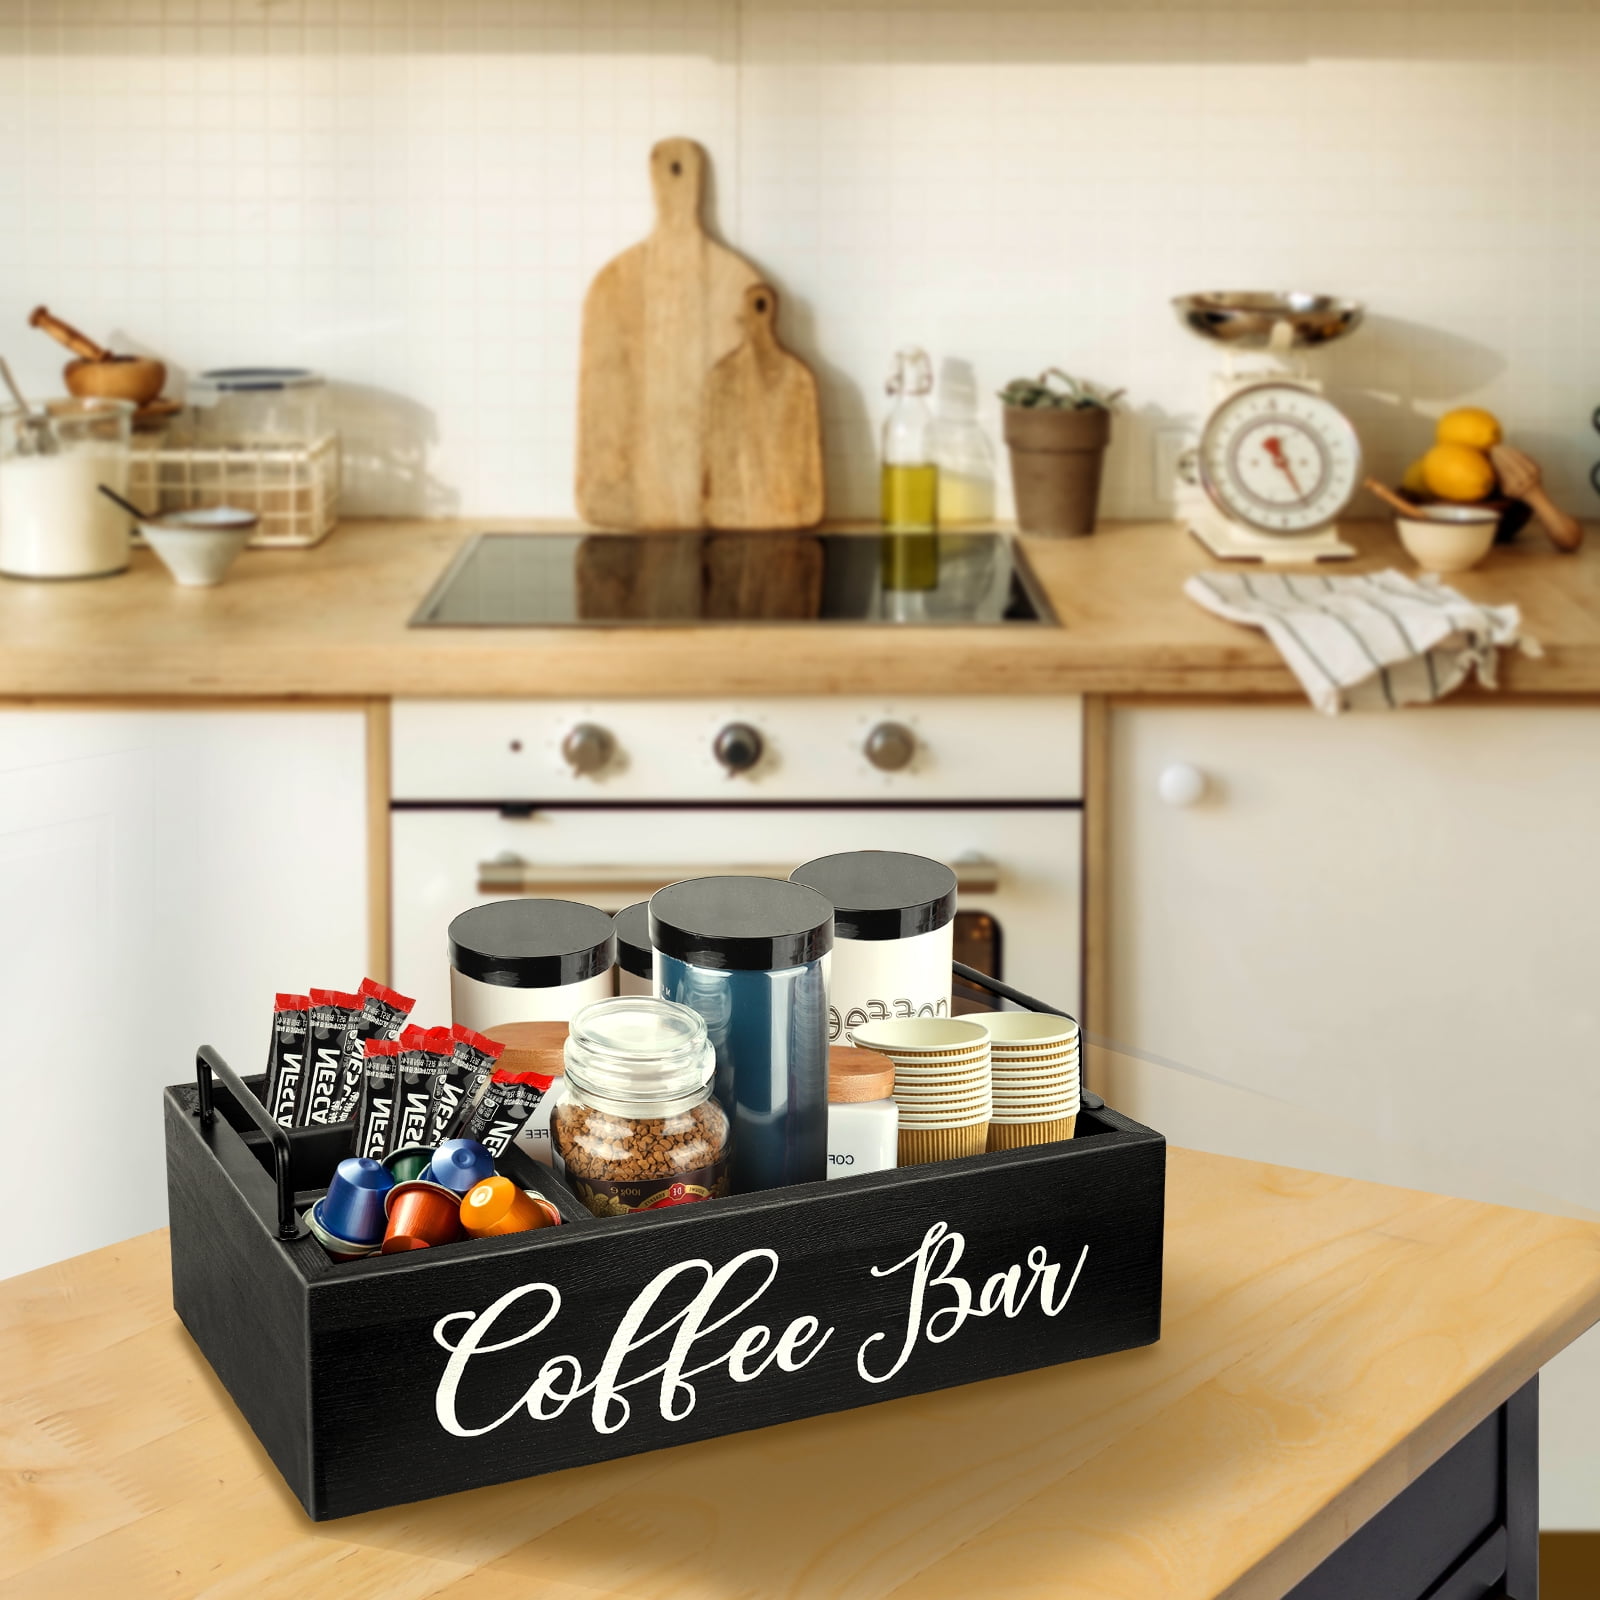  NewBeeclassic Wooden Coffee Station Organizer Set, Adjustable Coffee  Accessories Caddy for Countertop, Kcup Coffee Pod Holder Storage Basket  with Cup Serving Tray for Coffee Bar Decor (Wooden) : Home & Kitchen